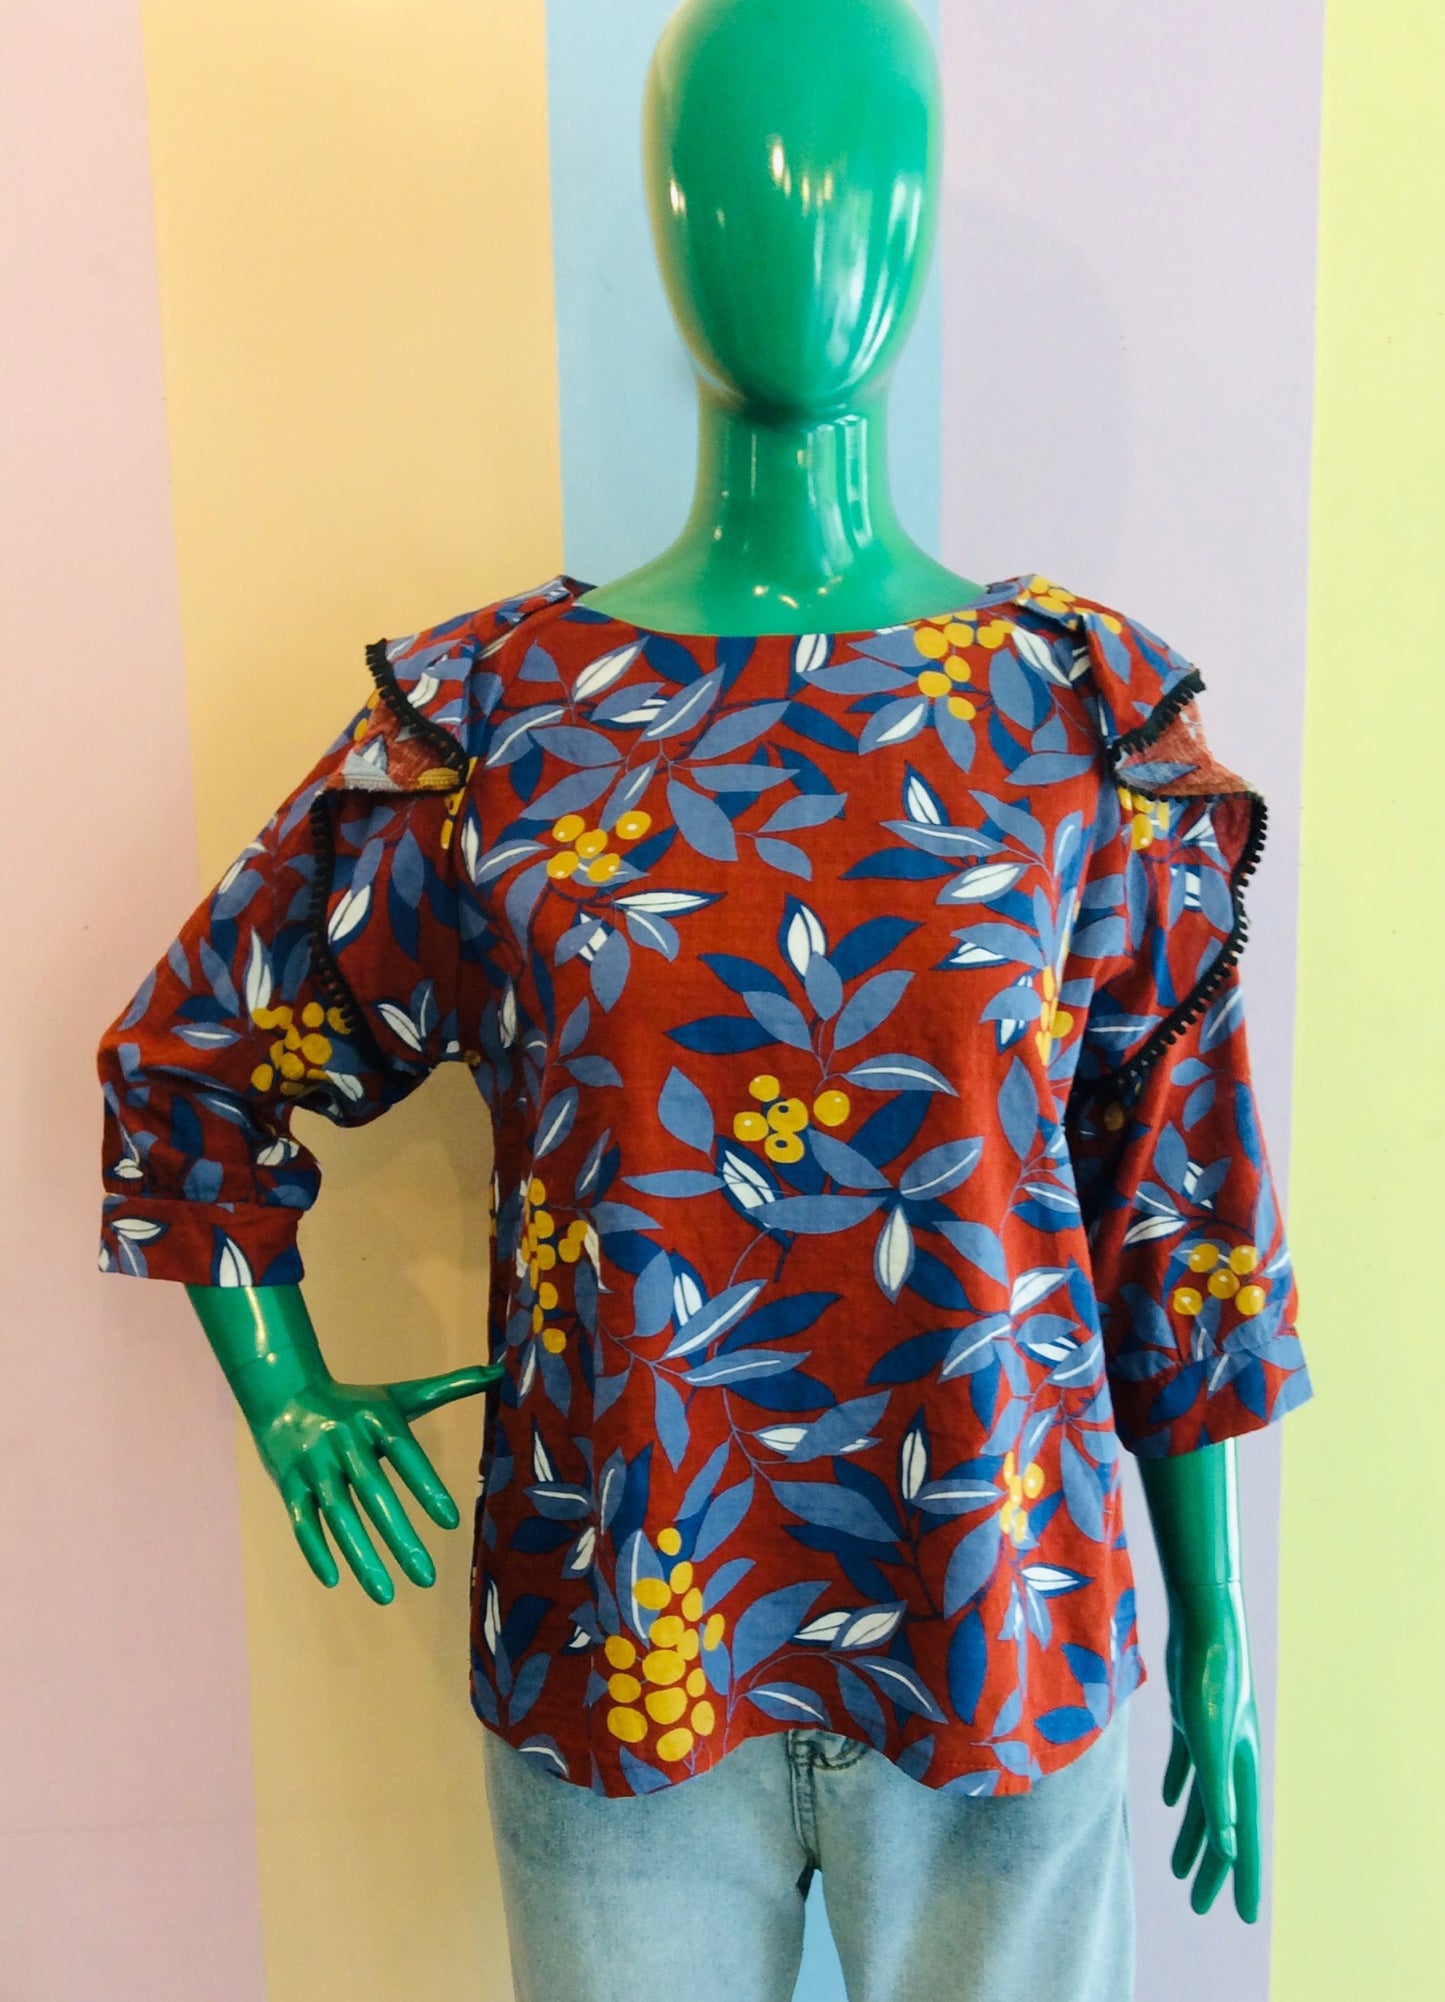 Tropical 3/4's Top w/ Ruffle Mexican Sleeves...